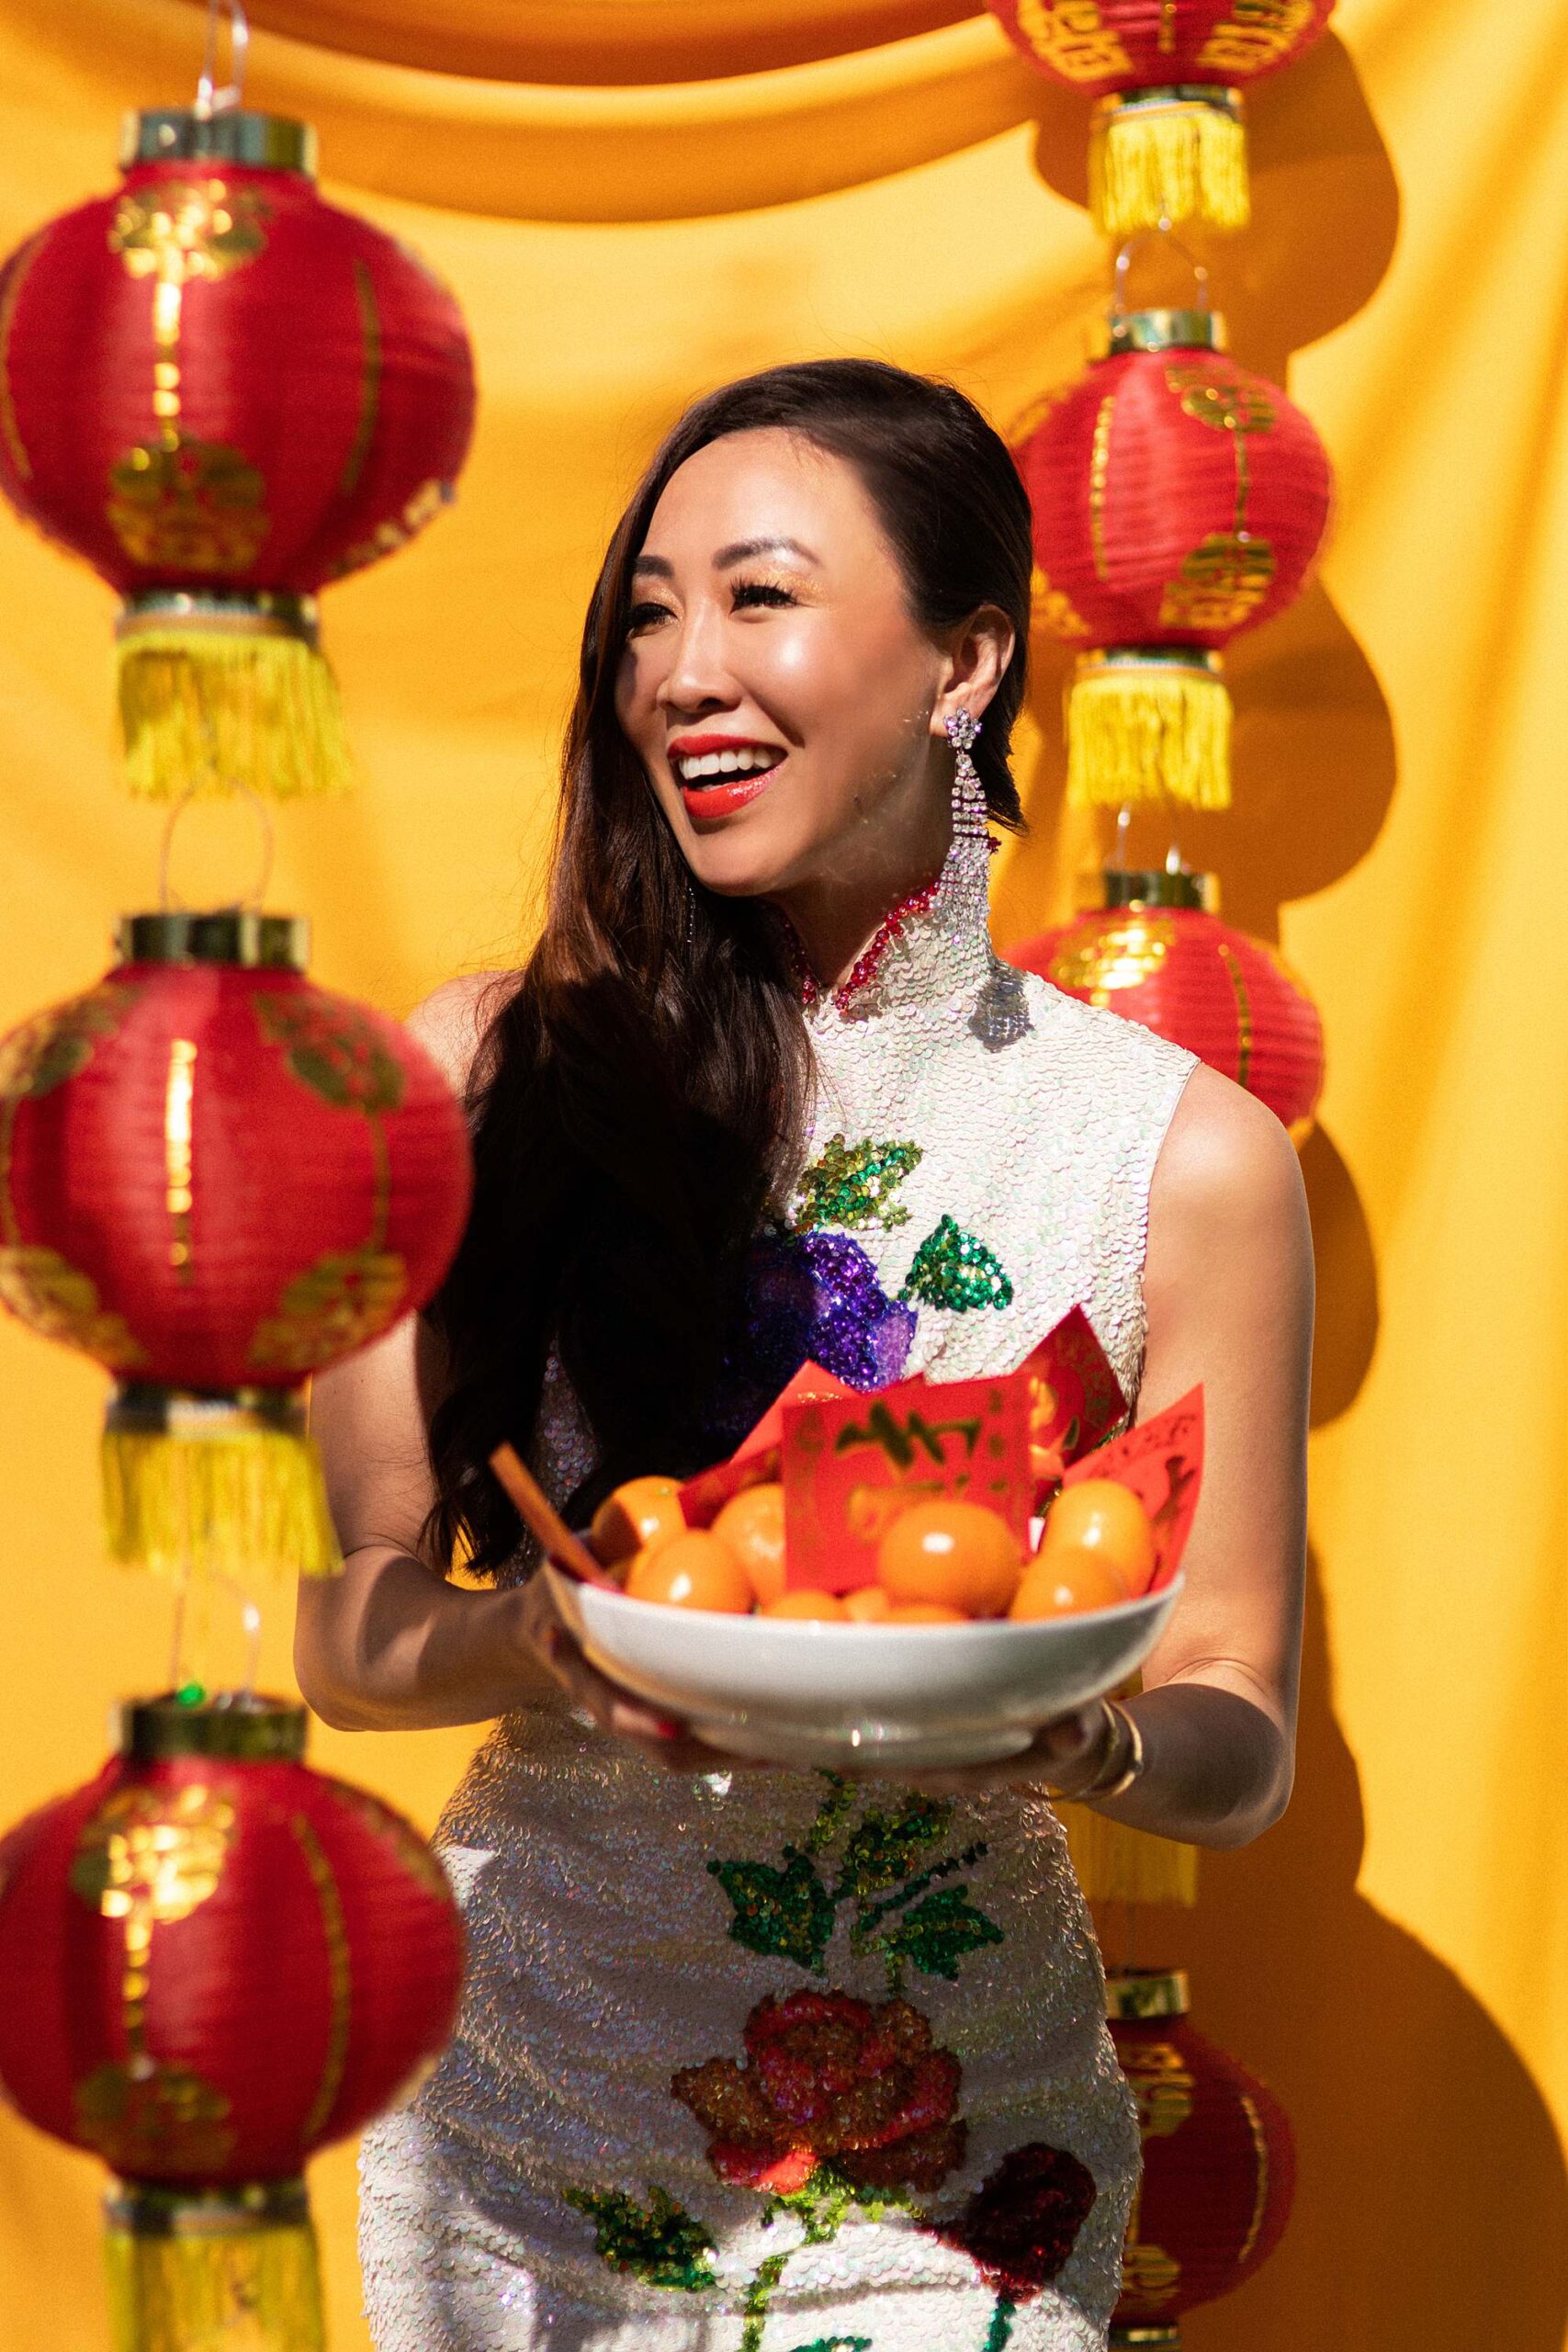 Chinese New Year lunar new year outfit and festivities - growing up Asian American blog post - DianaElizabethblog.com // Chinese girl in traditional sequin Chinese dress